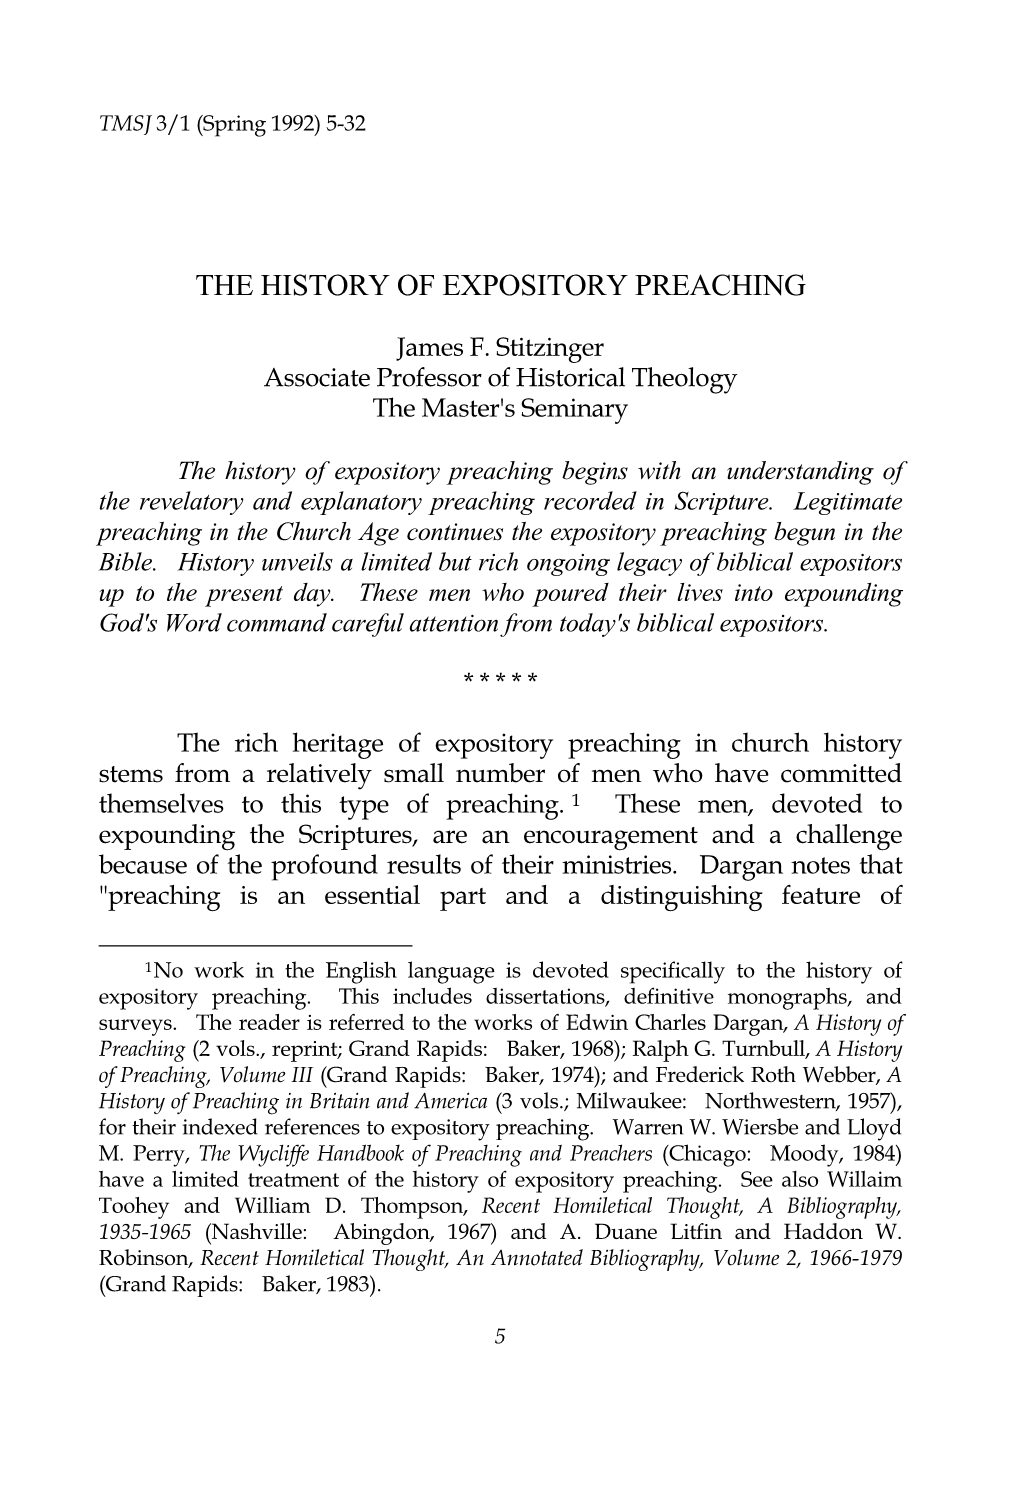 The History of Expository Preaching